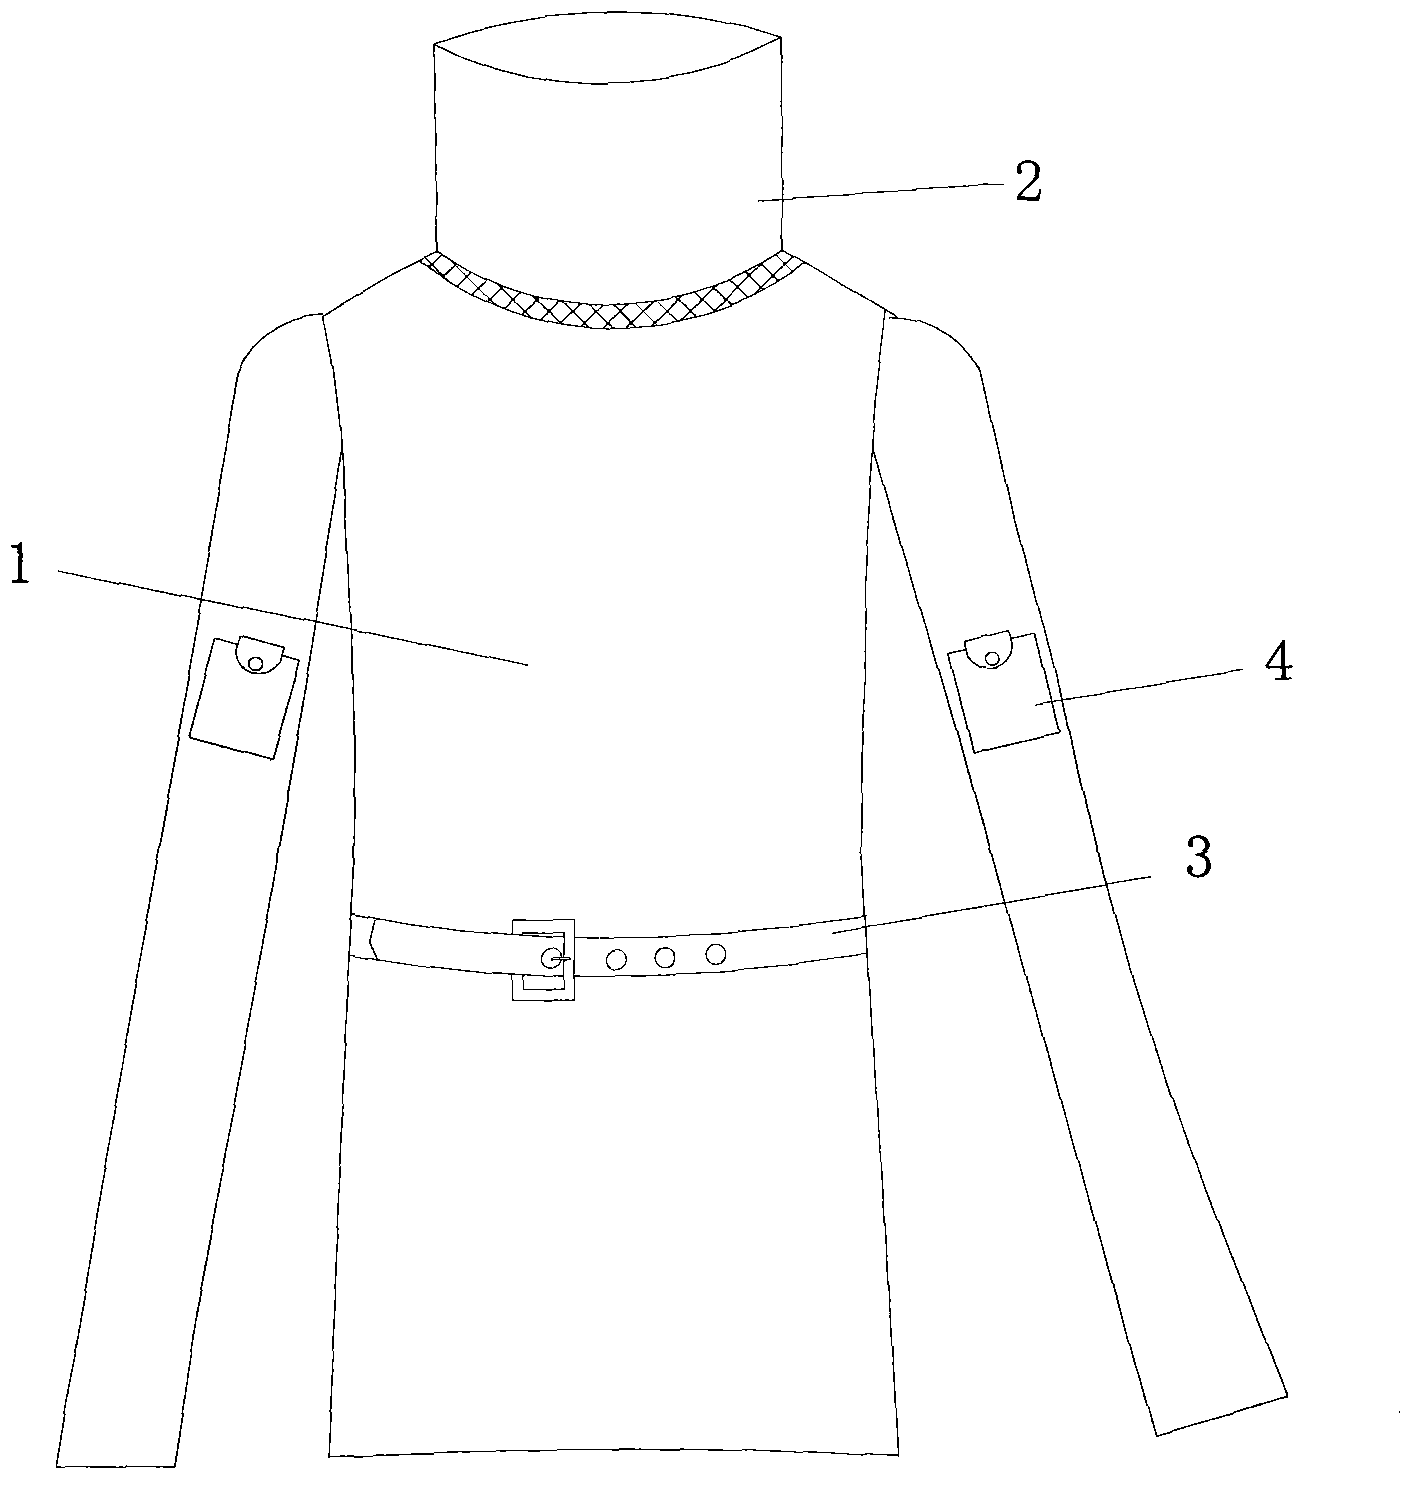 Water-absorbing and water-guiding garment with detachable collar